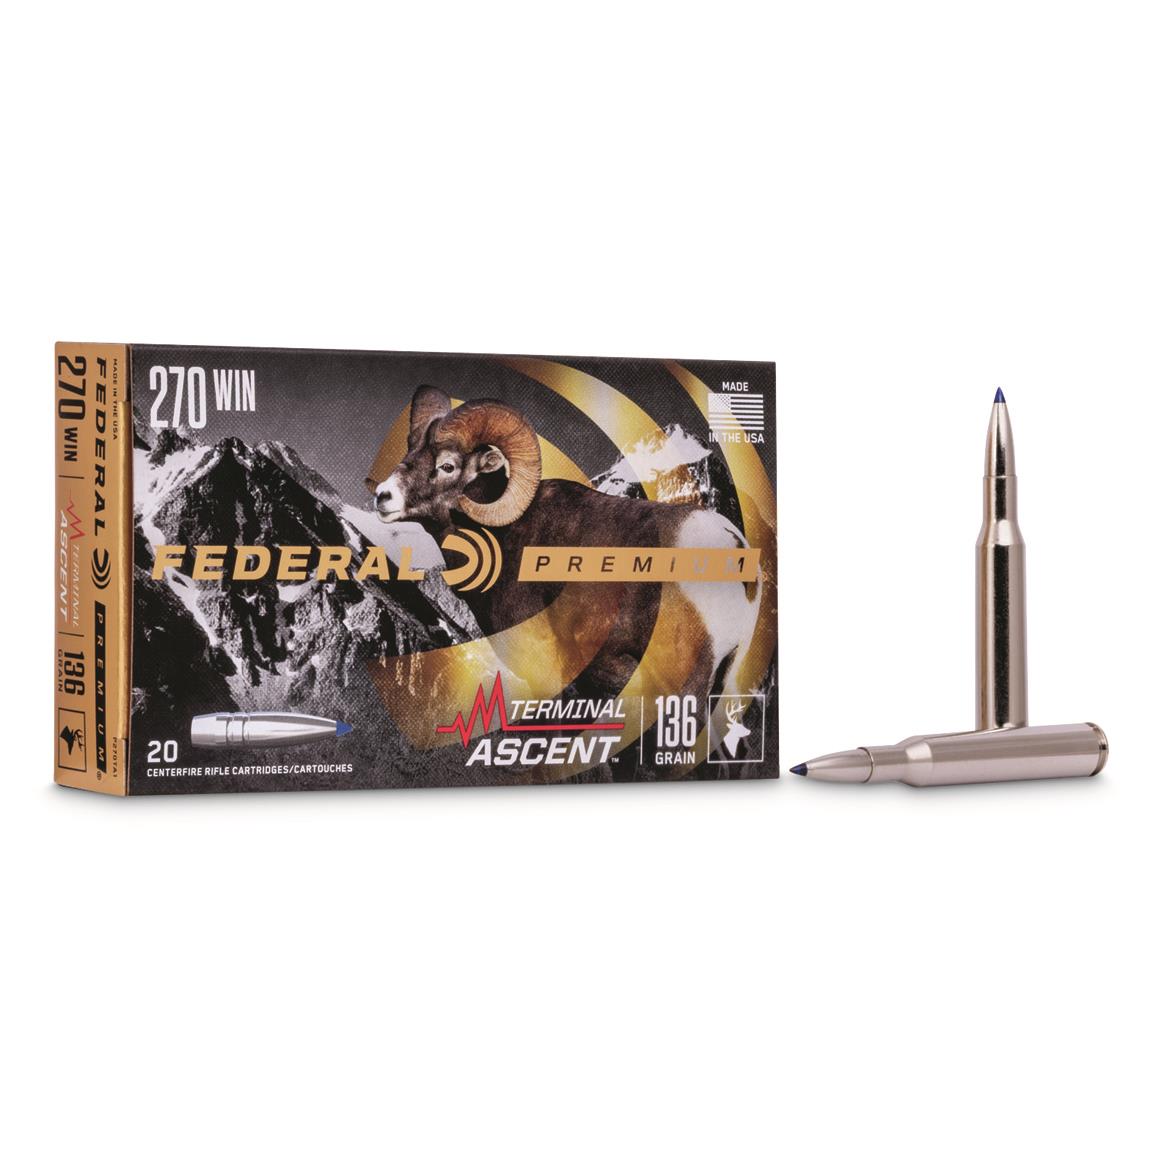 Federal Premium Terminal Ascent, .270 Winchester, Bonded Polymer Tip, 136 Grain, 20 Rounds